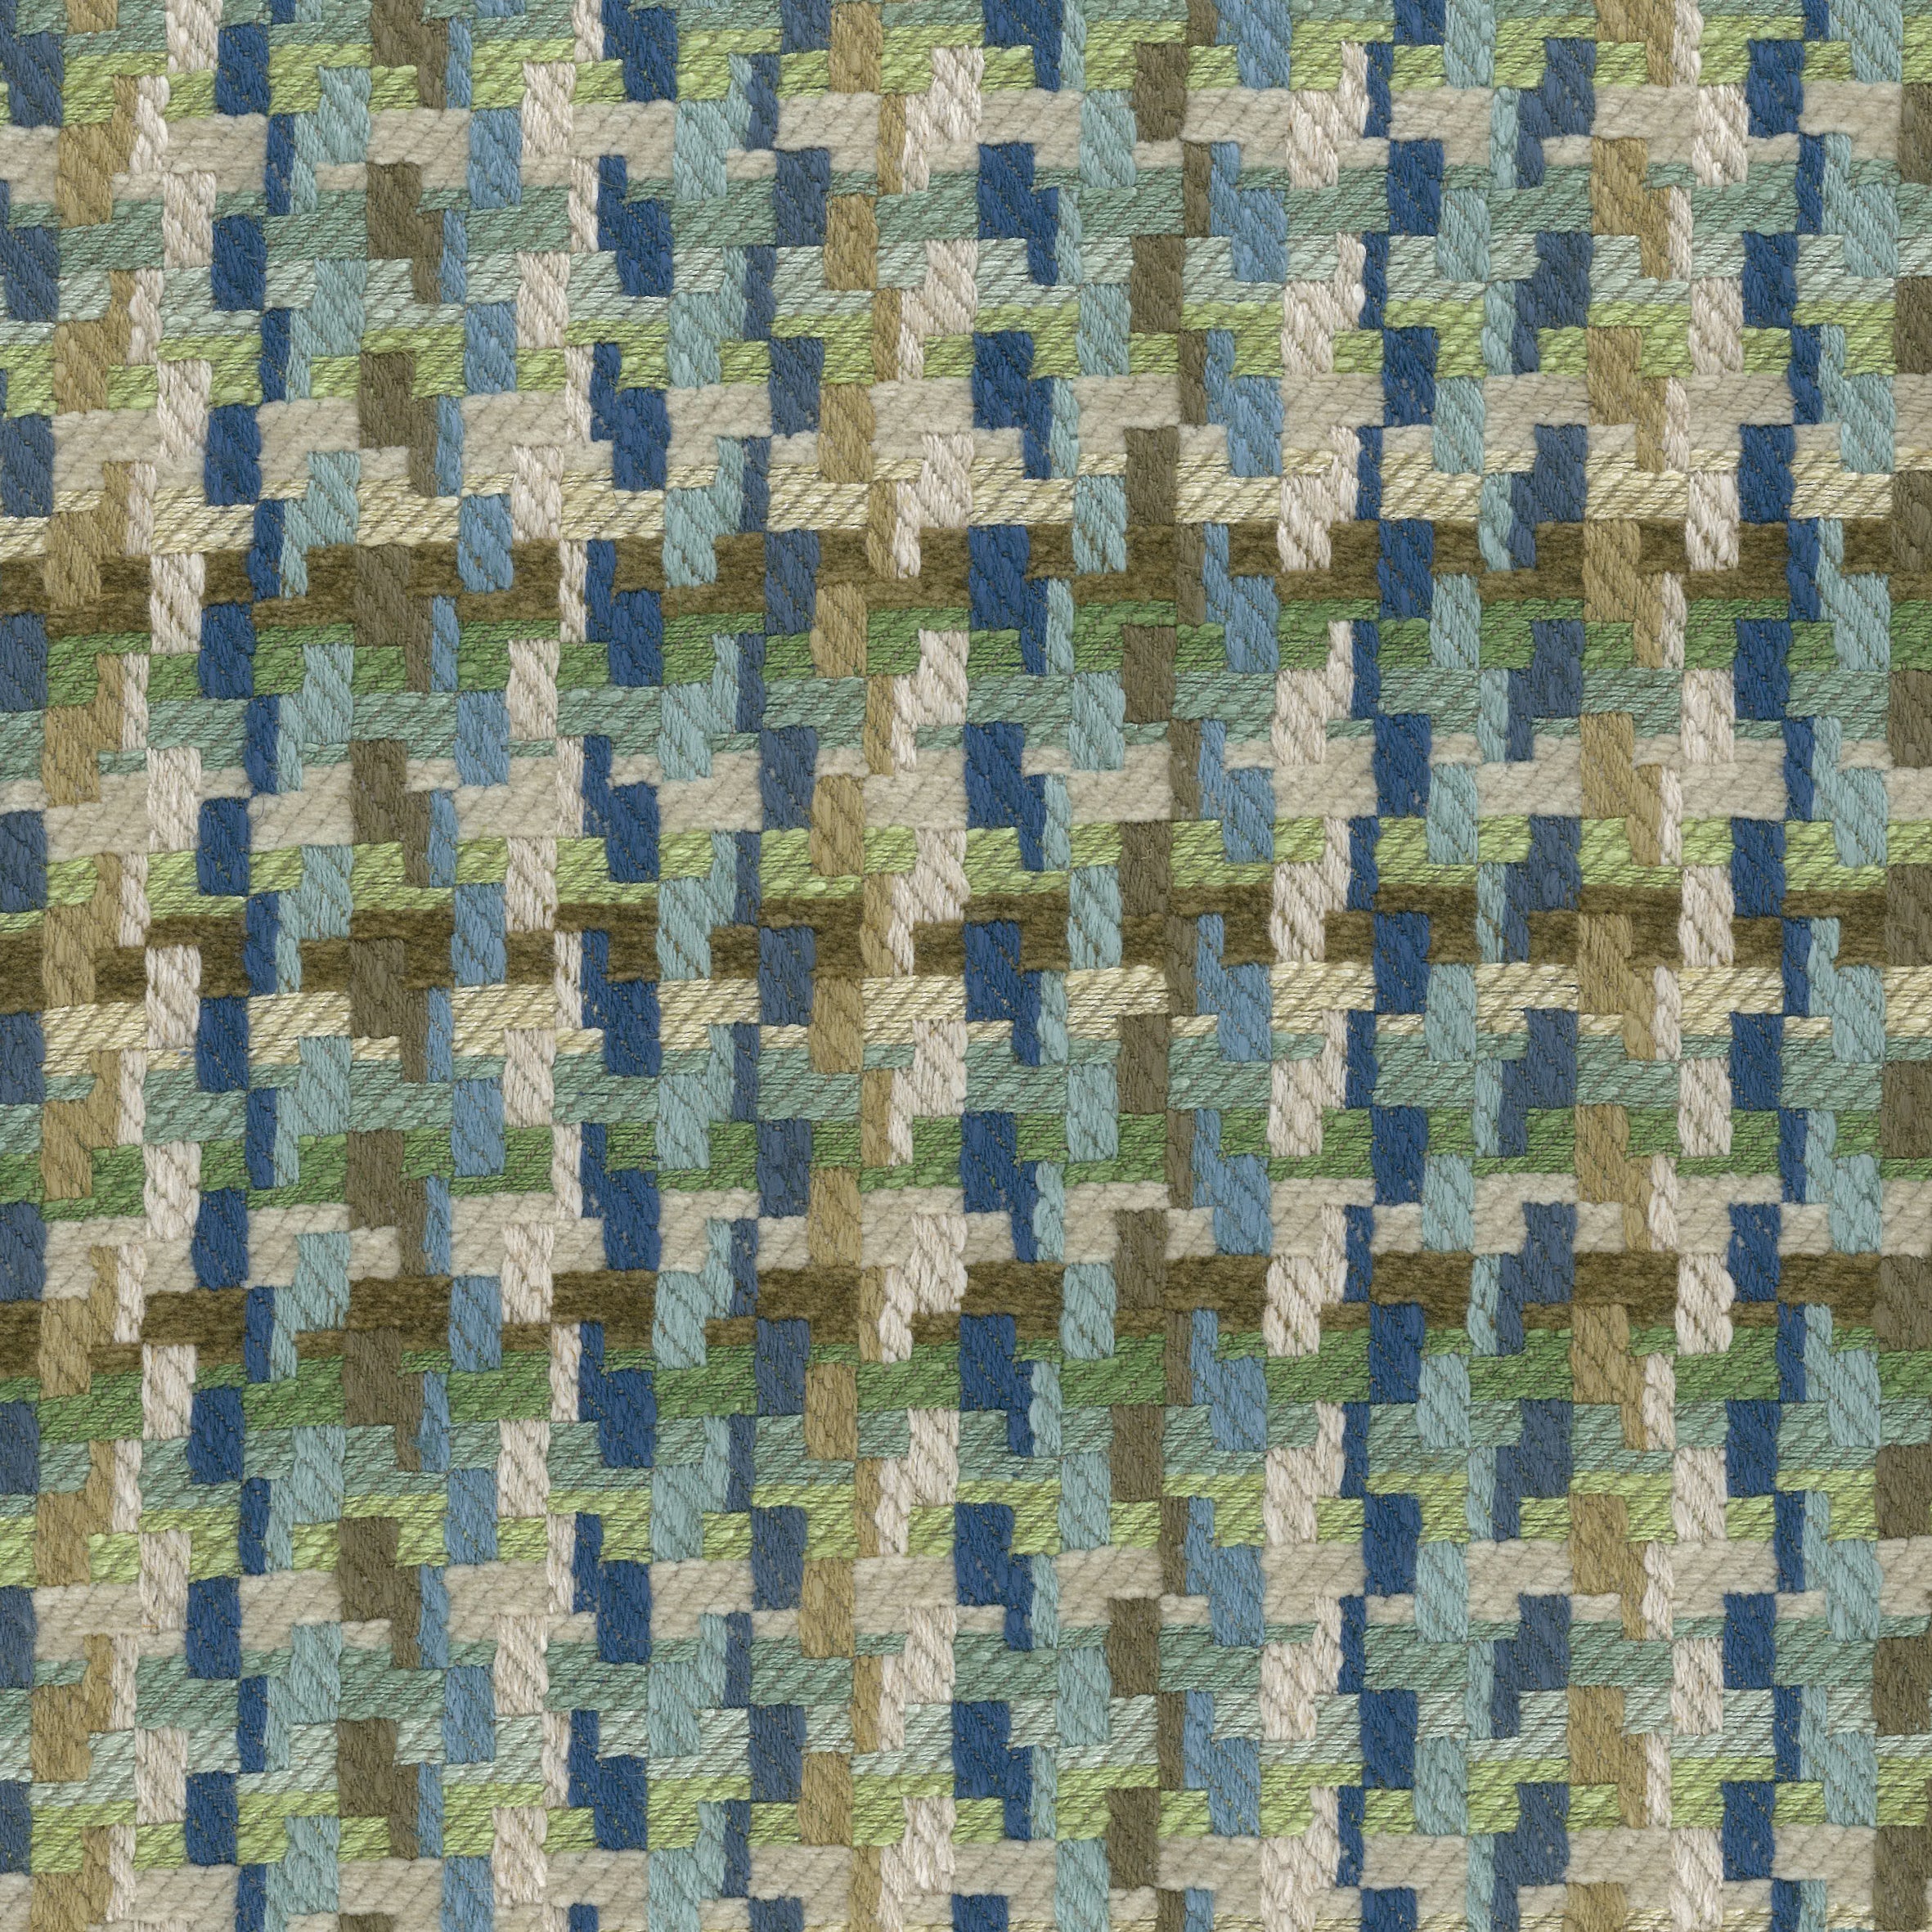 Nina Campbell Fabric -  Dallimore Weaves Hadlow Blue/Green/Bronze NCF4521-01